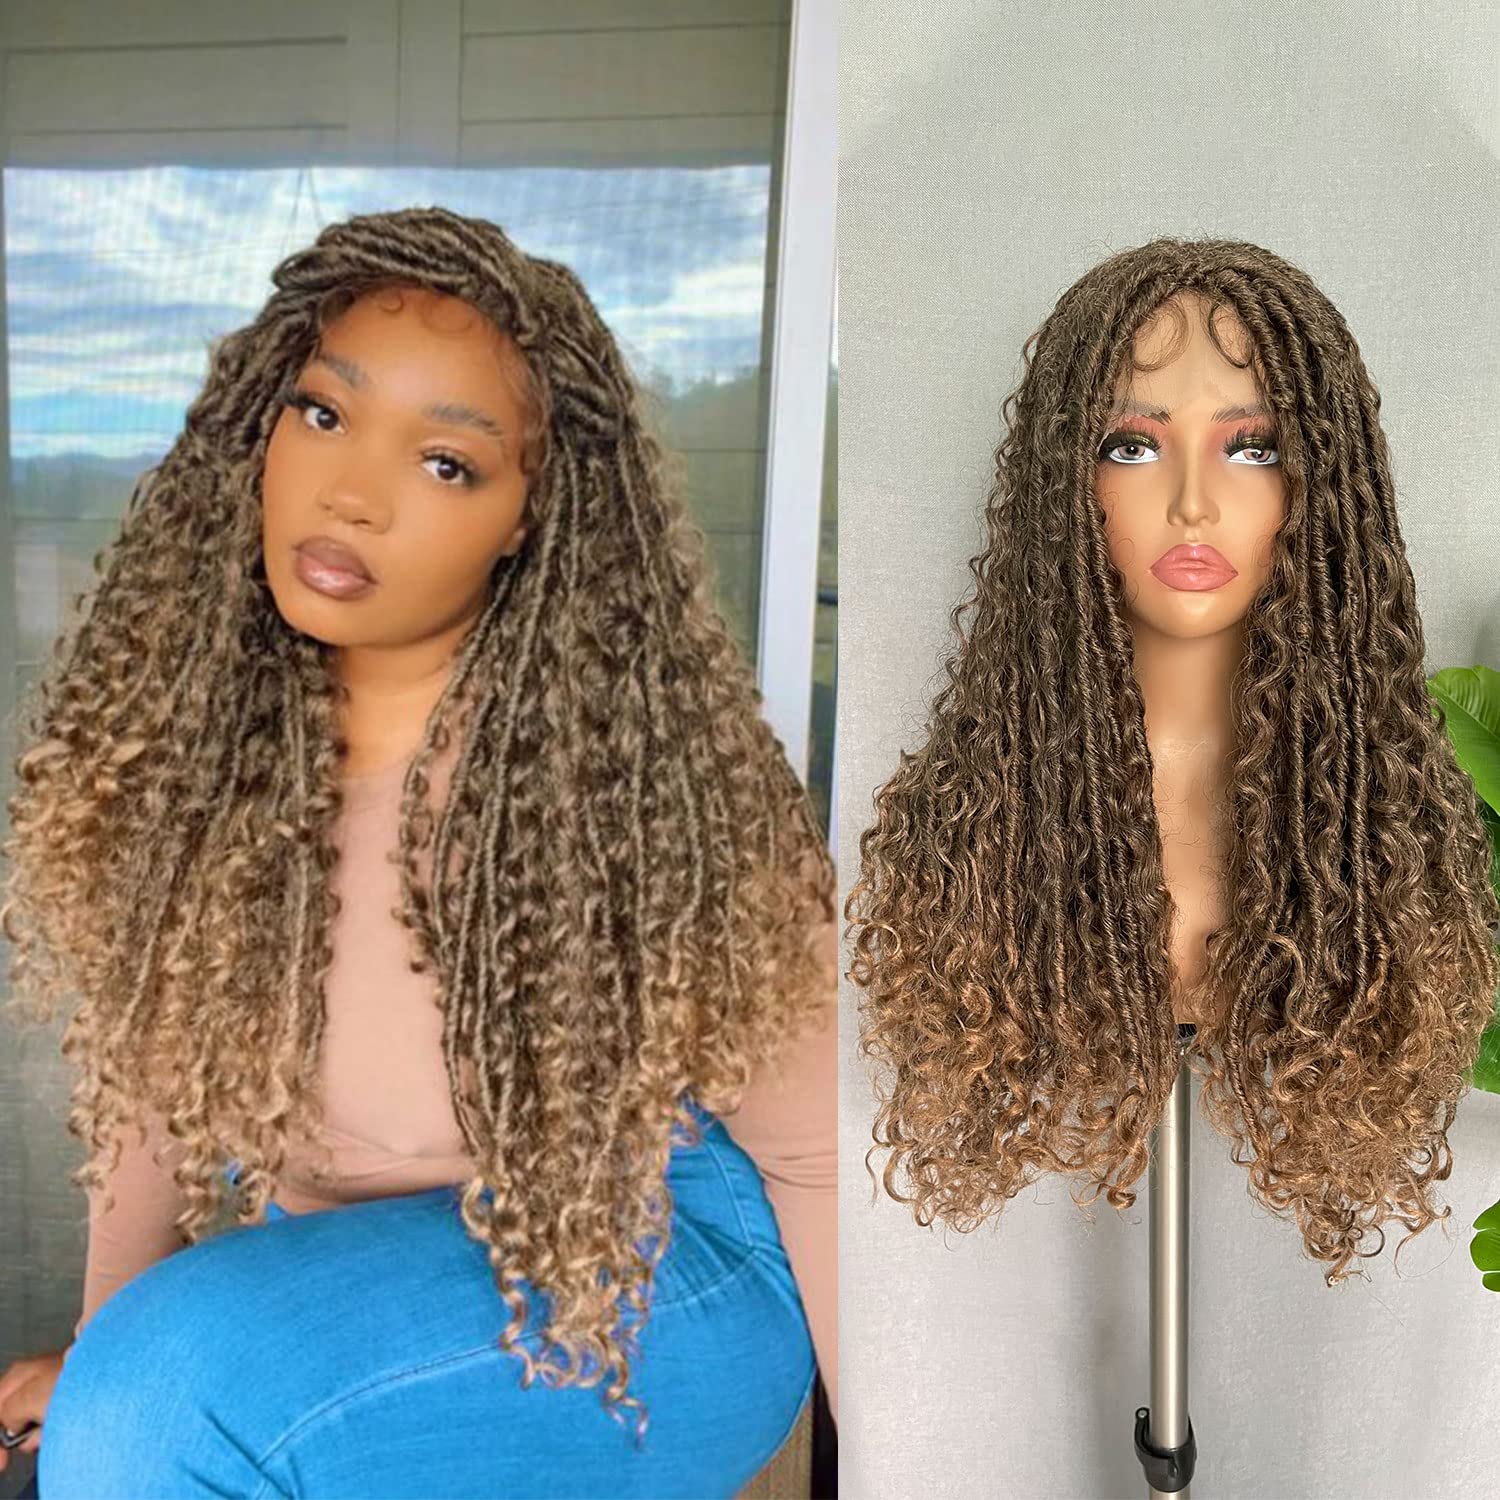 SOKU Lace Front Faux Locs Braided Wig 28 Swiss Lace Ombre Brown